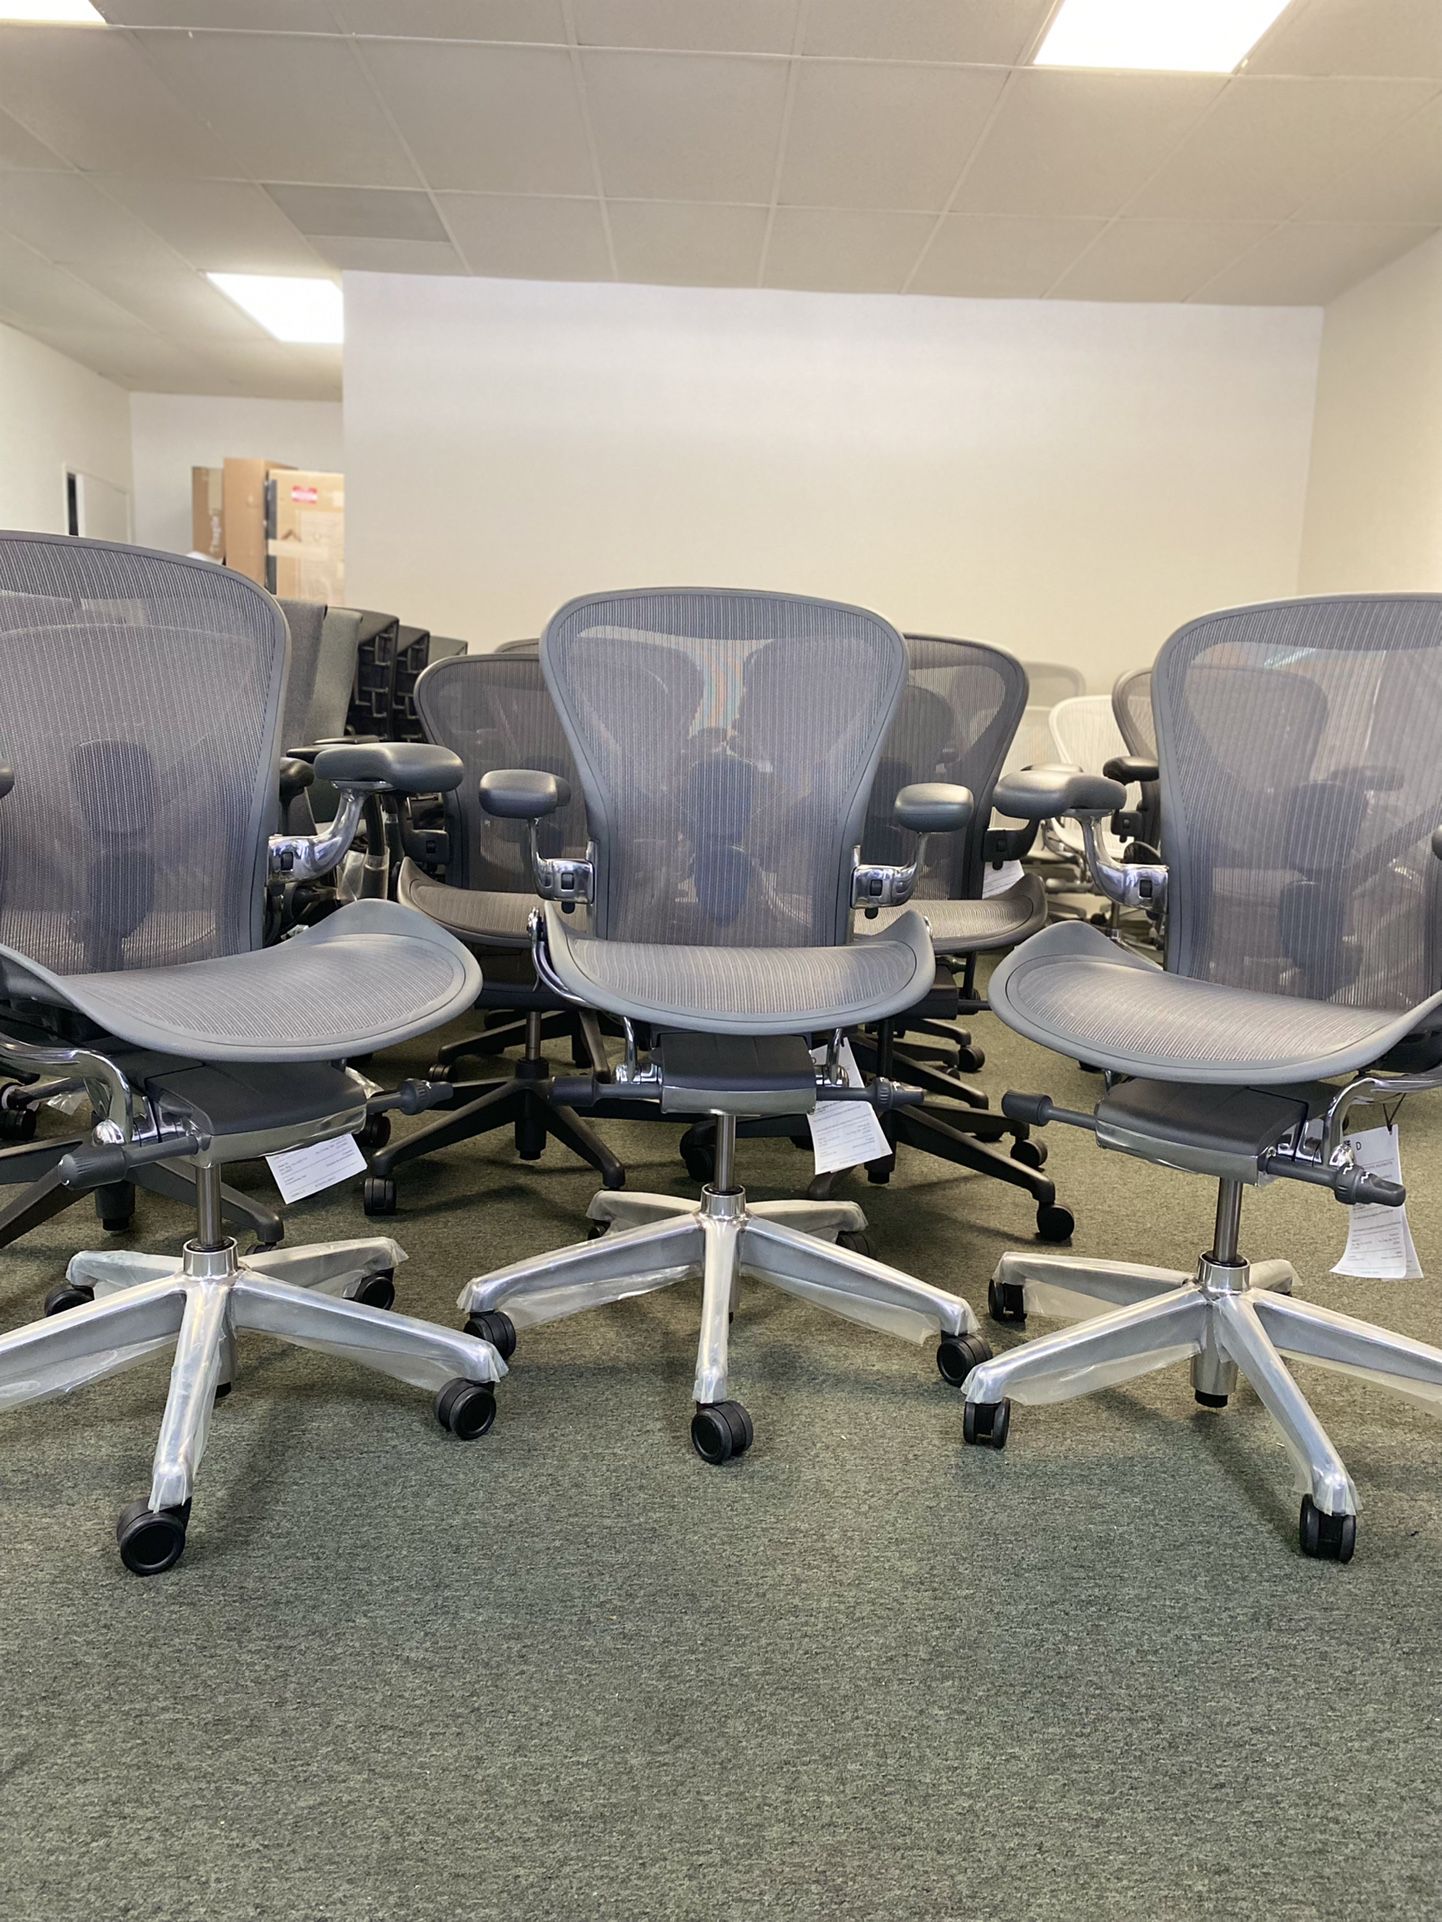 BRAND NEW HERMAN MILLER AERON CHAIR ( LATEST VERSION ) 🔥12 YEAR WARRANTY 🔥 30 DAYS MONEY BACK GUARANTEE 🔥SECURE PAYMENT 